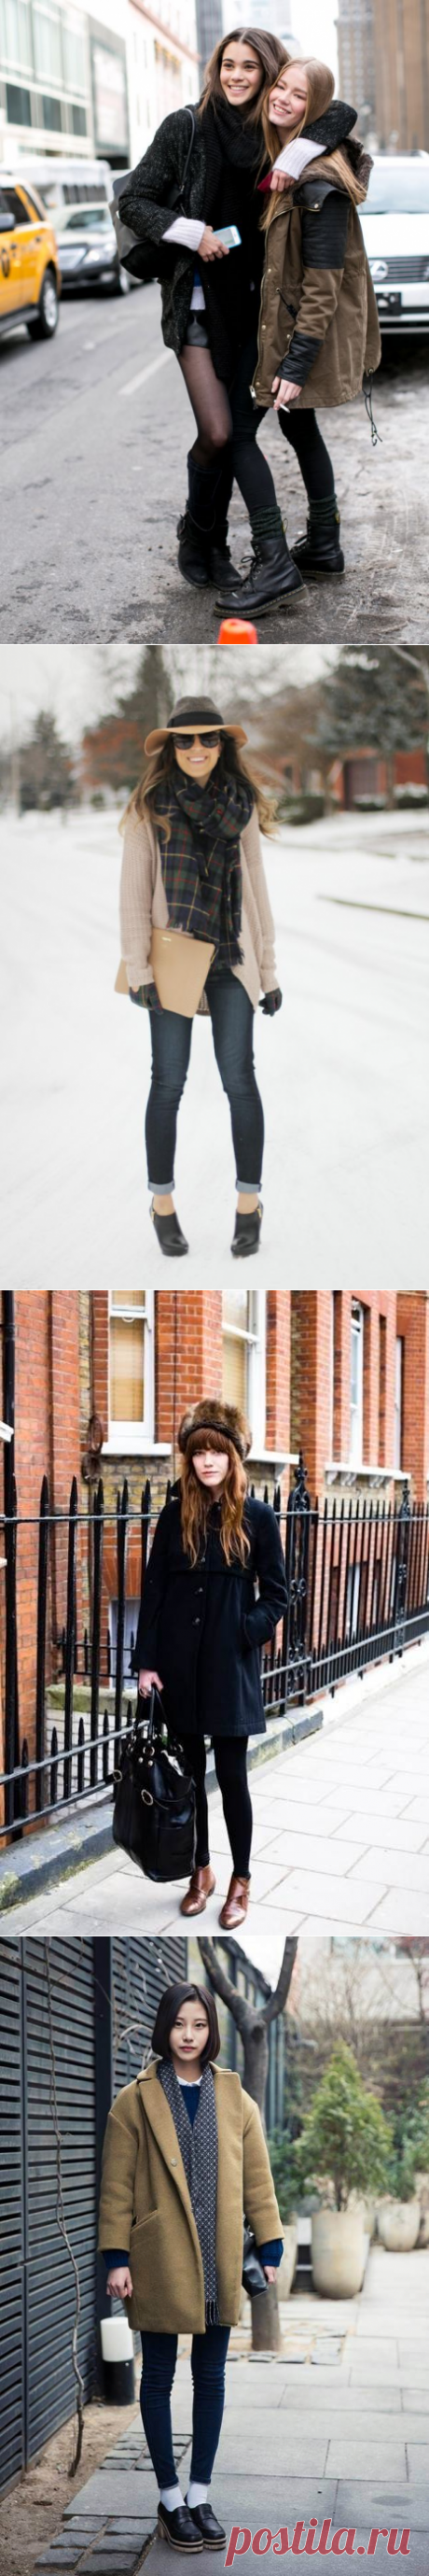 How To Look Fashionable On Winter (Street Style Inspirations)